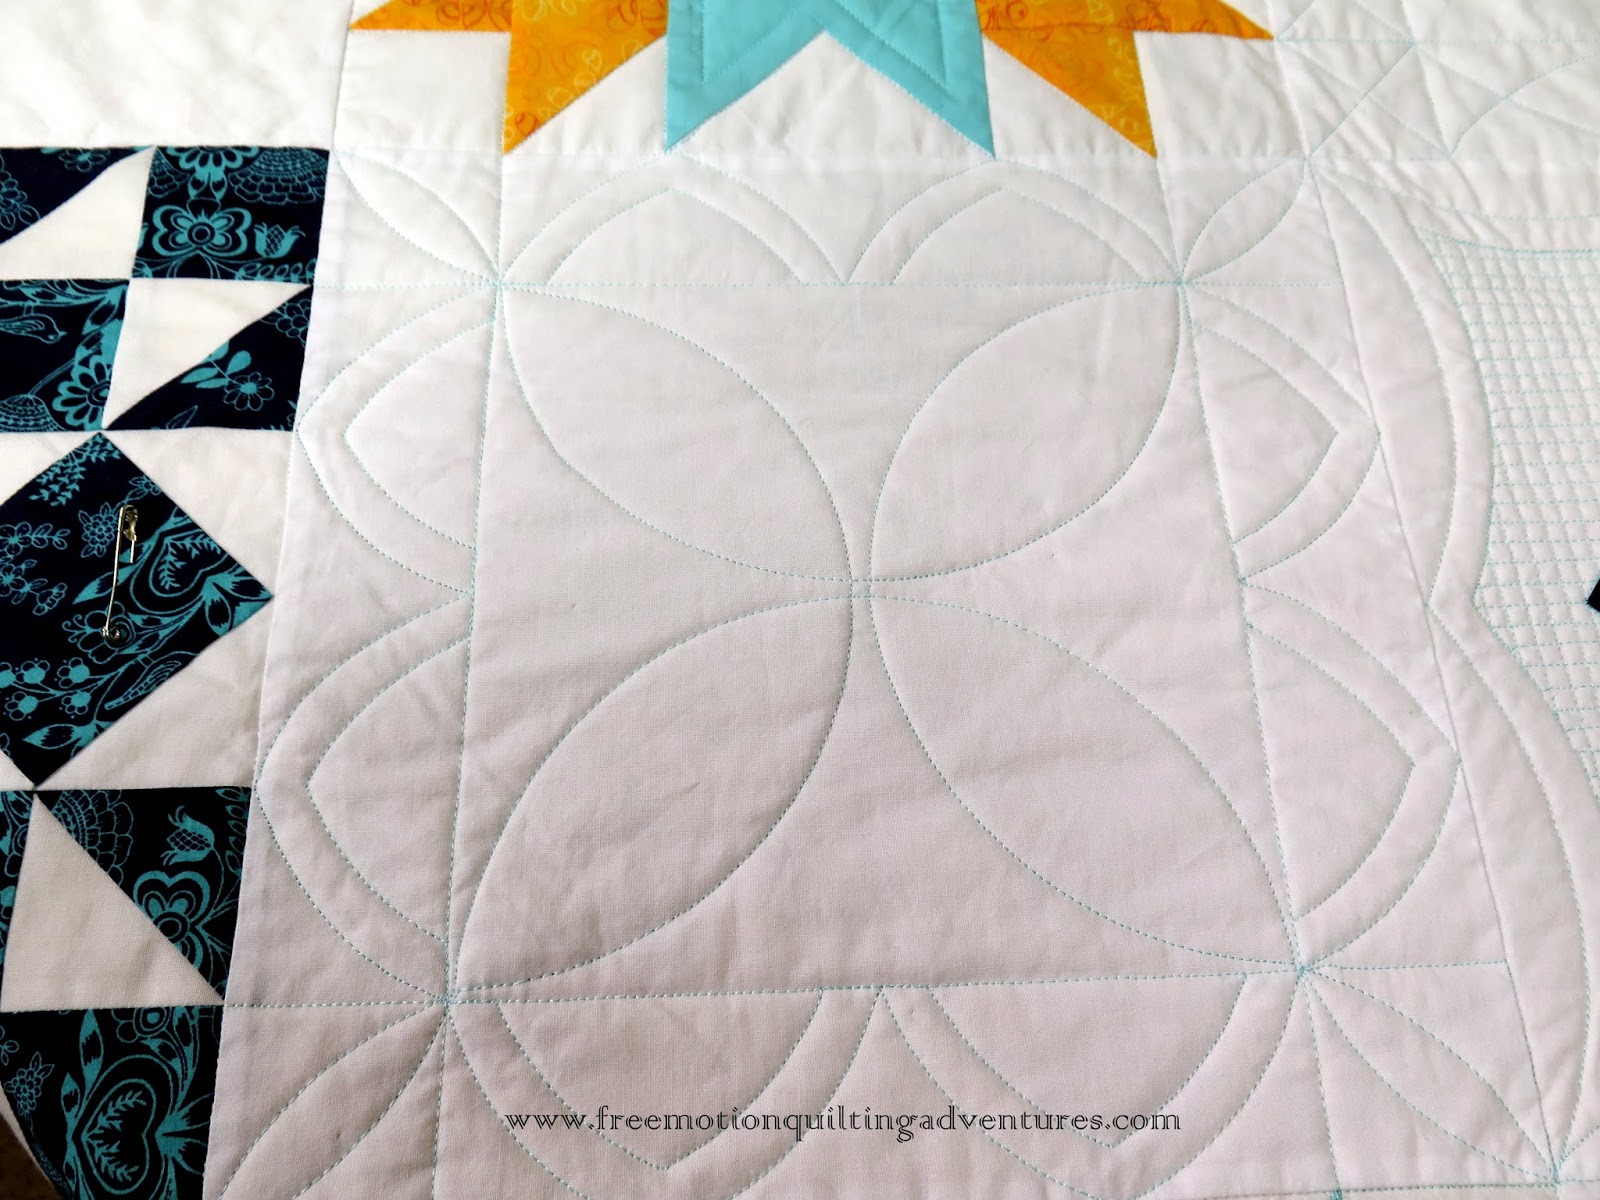 Elm Street Quilts: Free Motion Quilting with Rulers